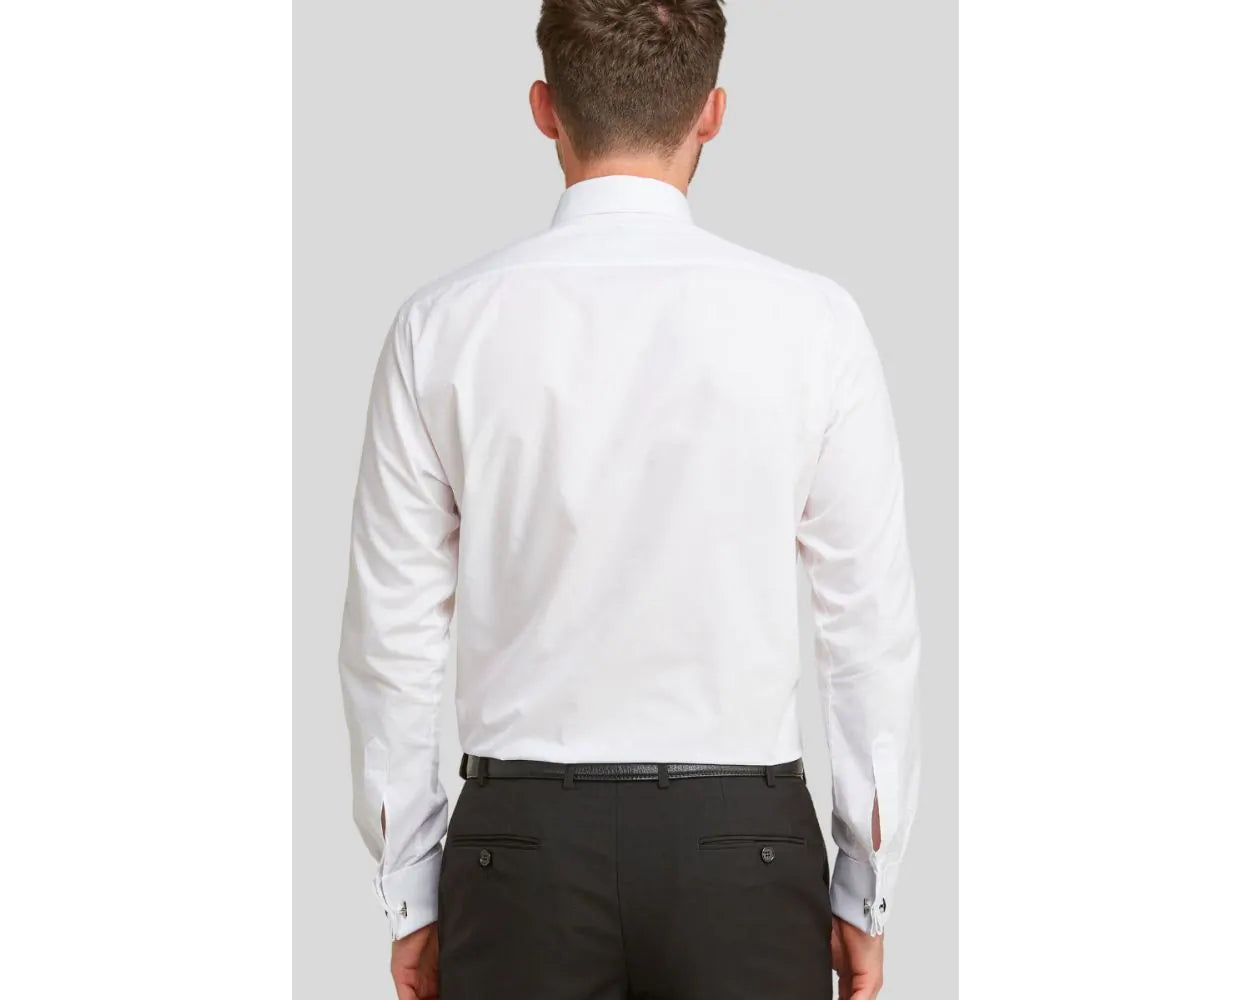 DOUBLE TWO Pleated Stitch Front Dress Shirt -  Double Cuff Regular Collar – White